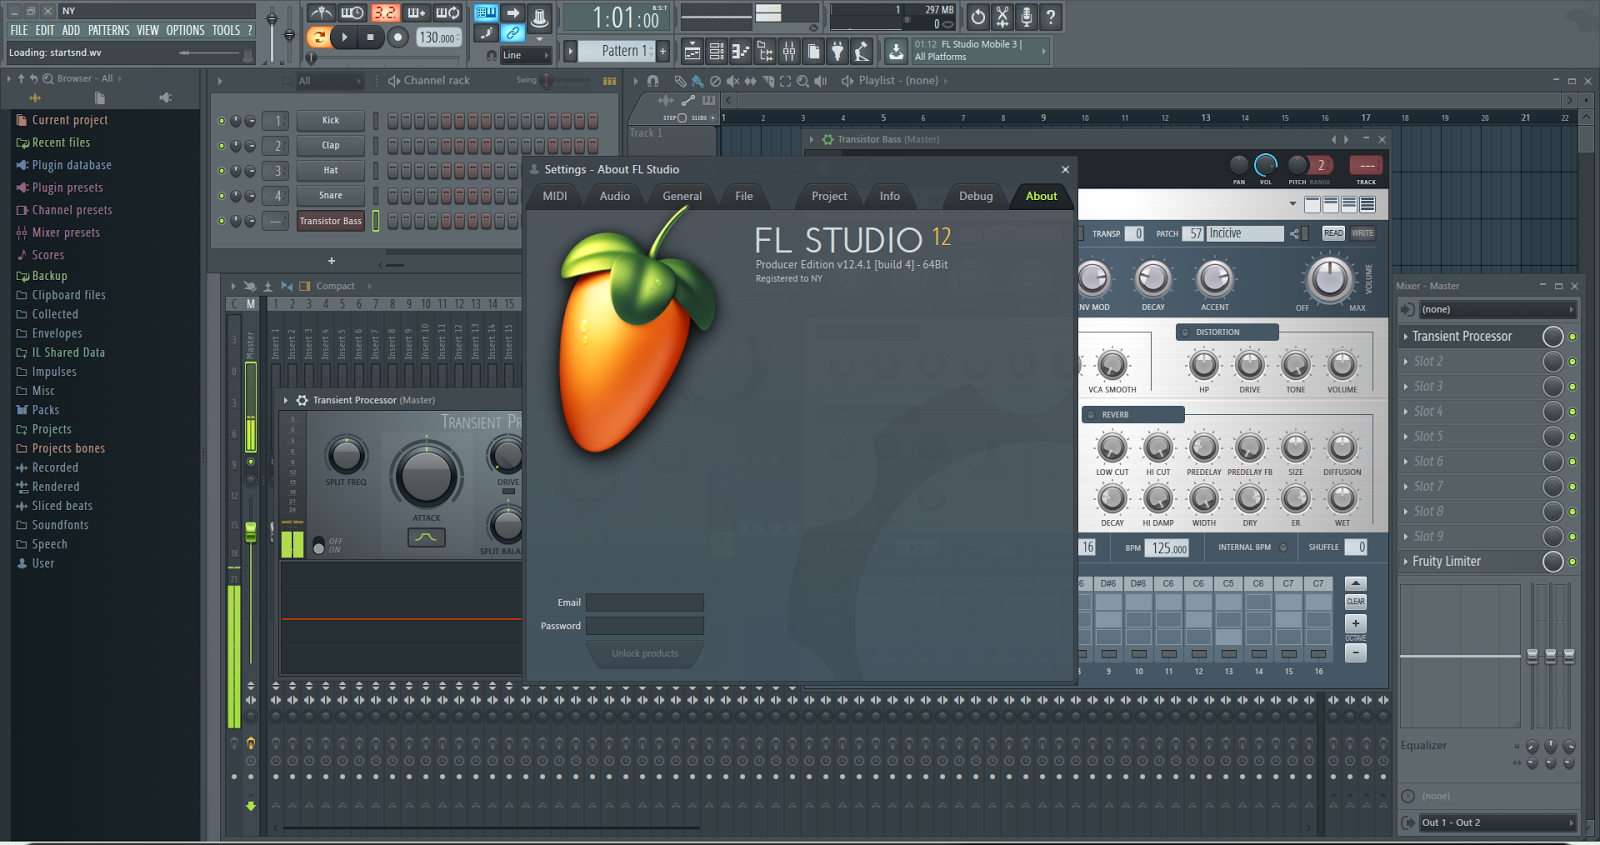 for android download FL Studio Producer Edition 21.1.0.3713